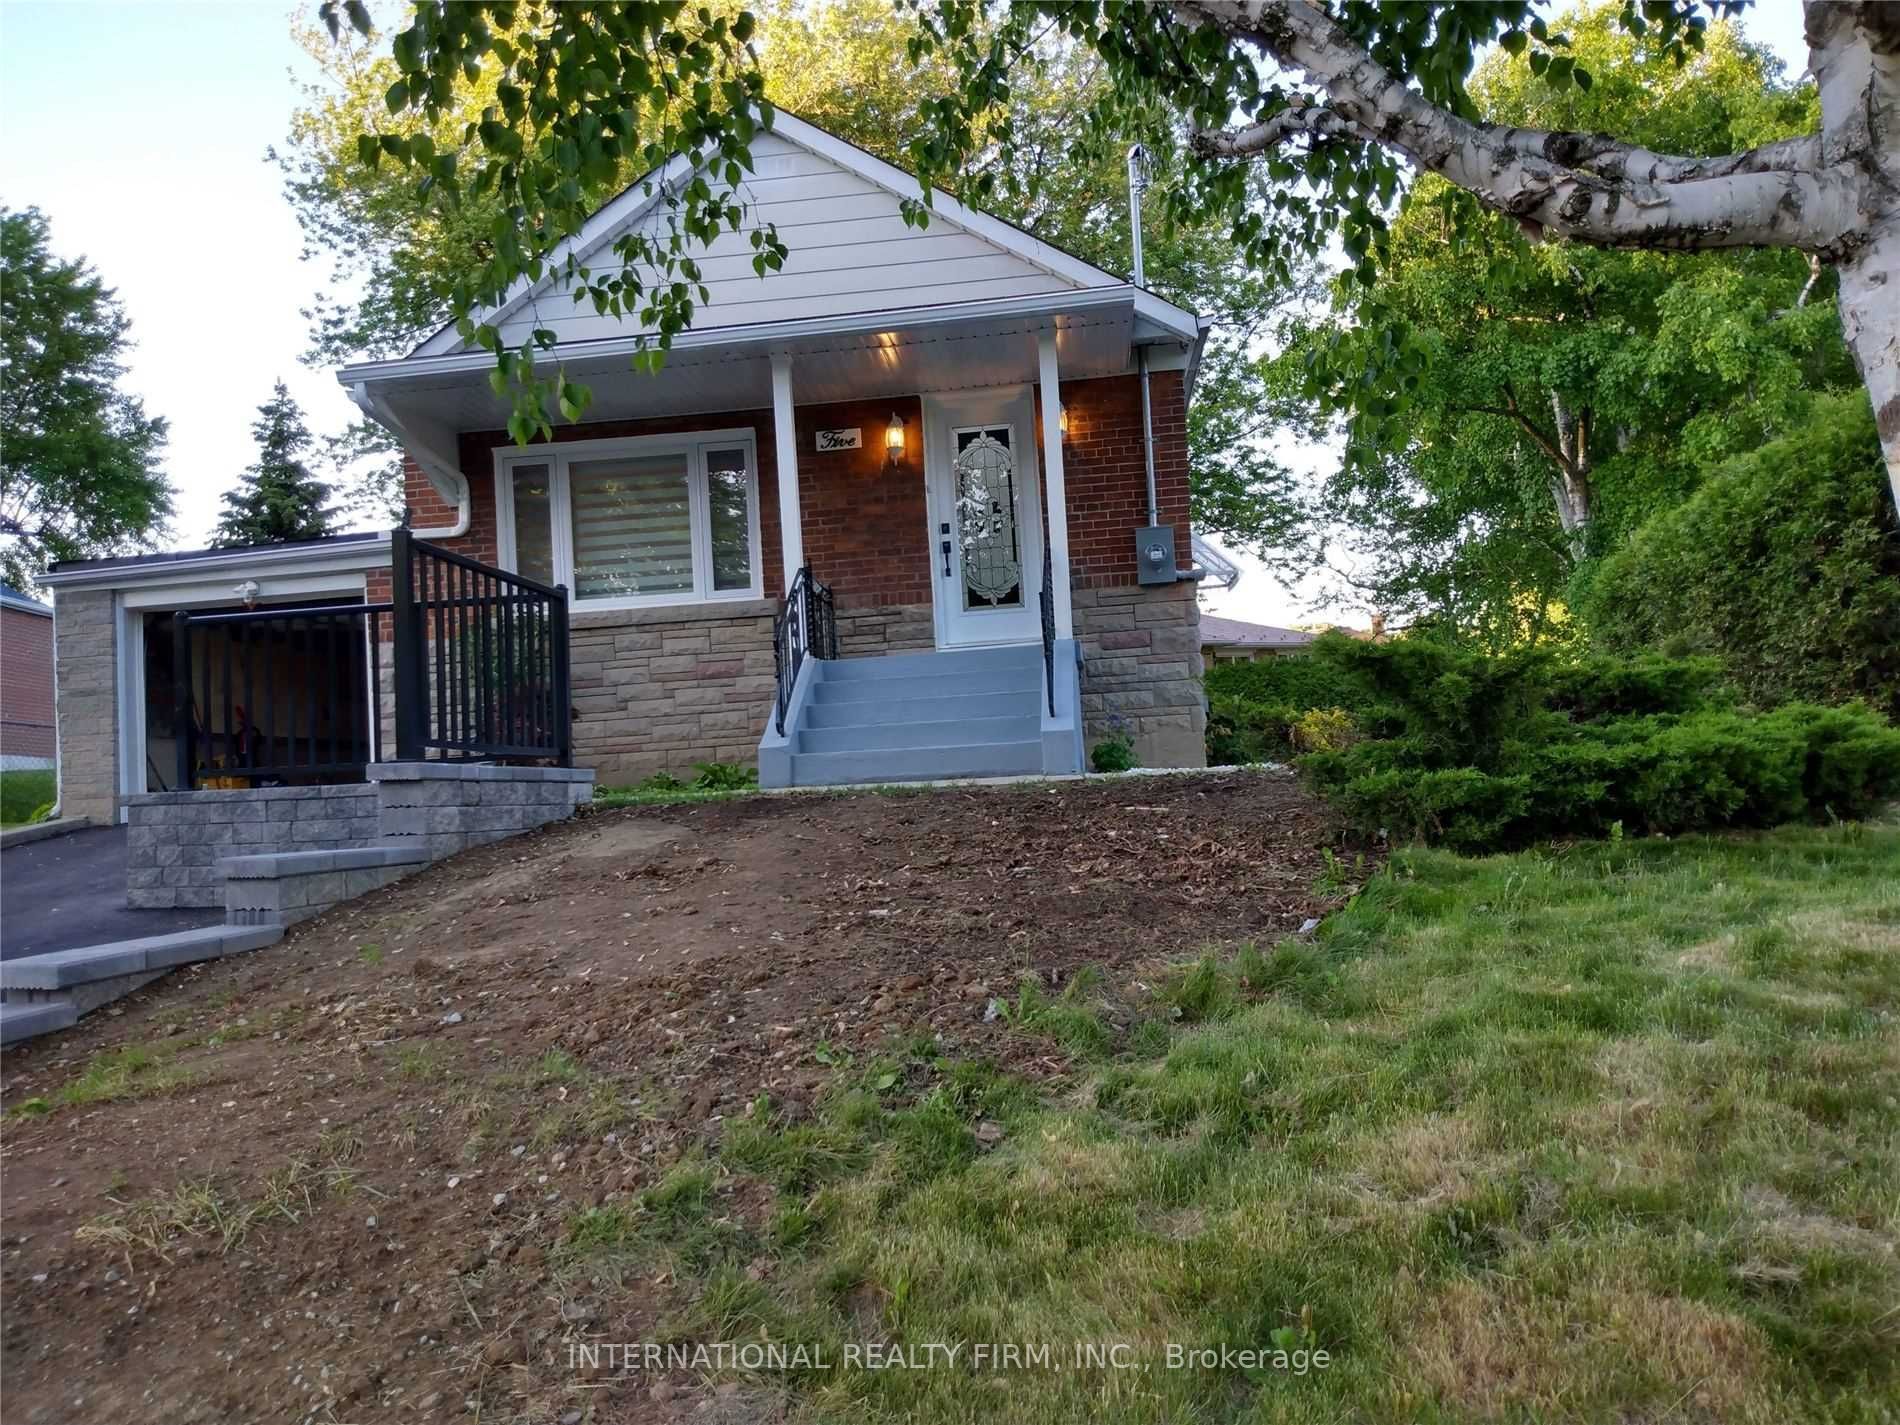 Main Photo: Lowerb2 5 Aylesford Drive in Toronto: Birchcliffe-Cliffside House (Bungalow) for lease (Toronto E06)  : MLS®# E6027264